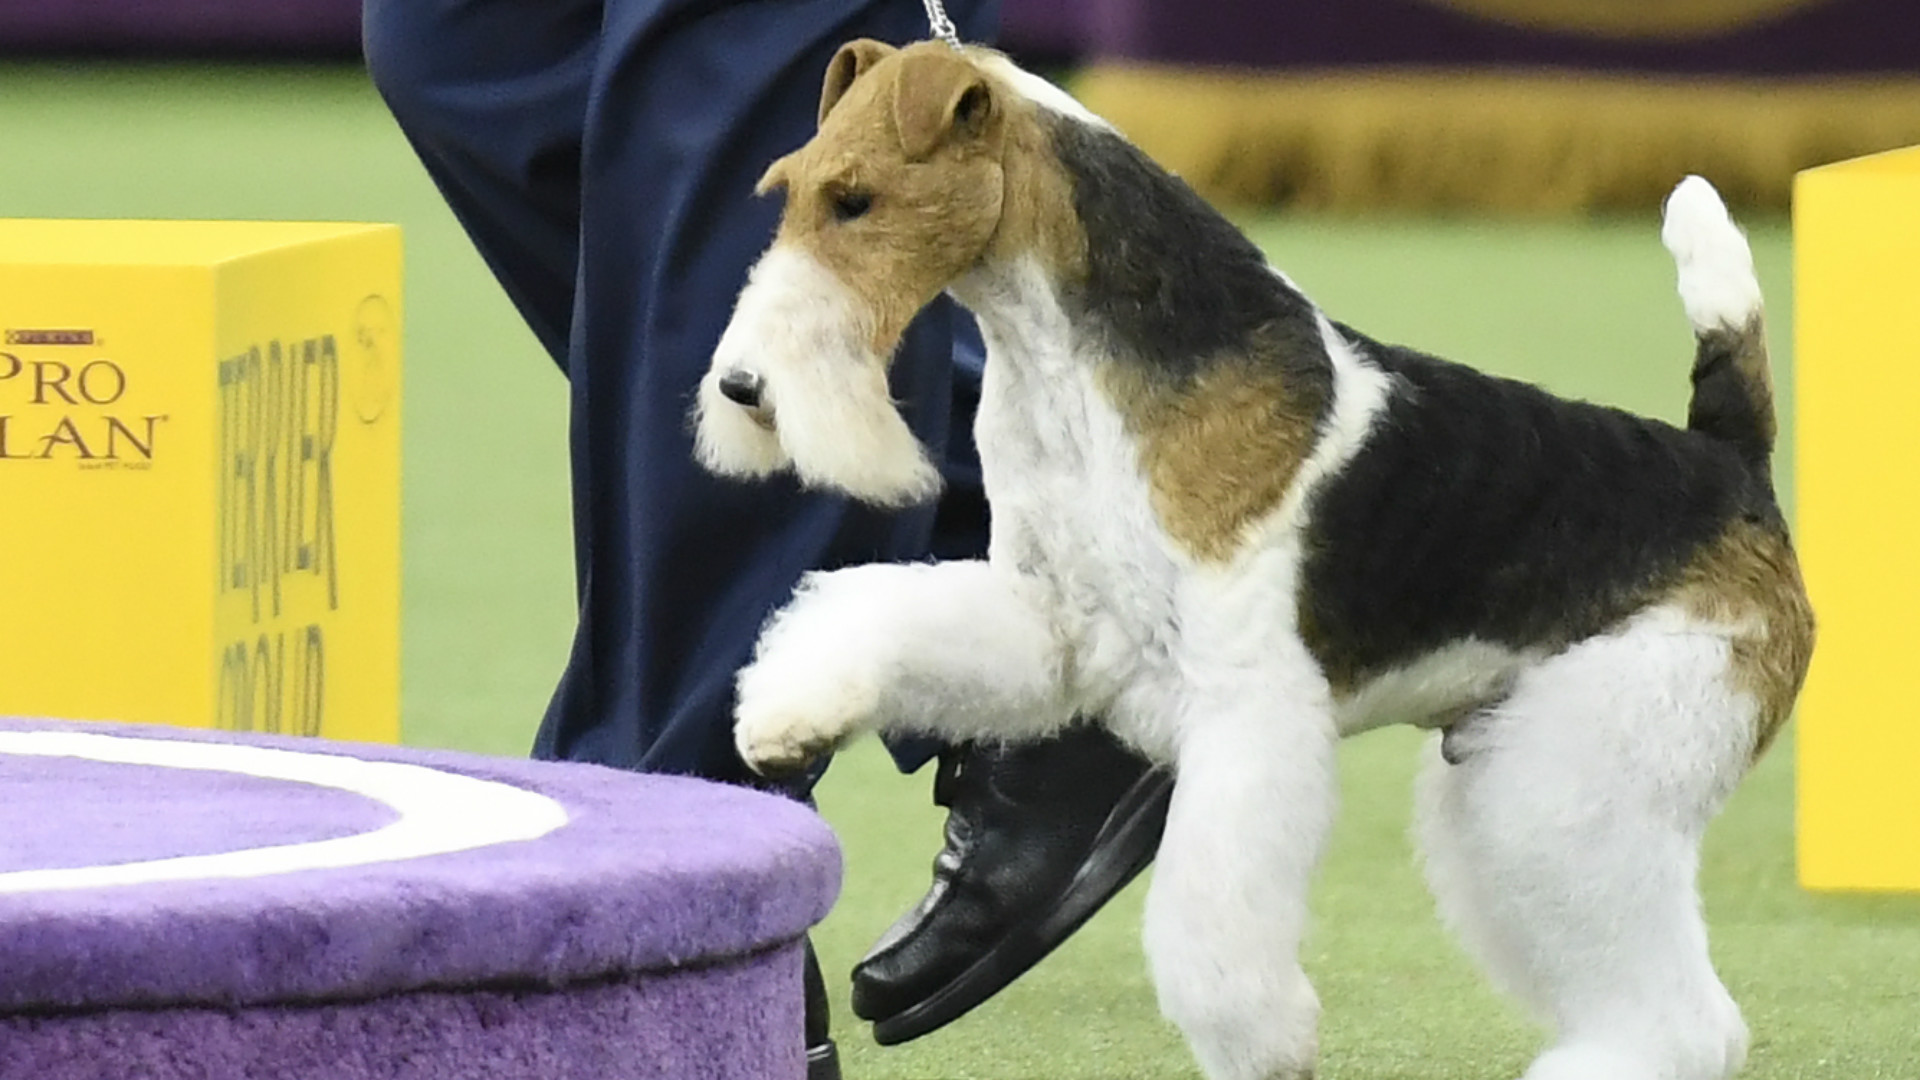 Westminster Dog Show 2019 Breed results, winners, Fox Terrier wins